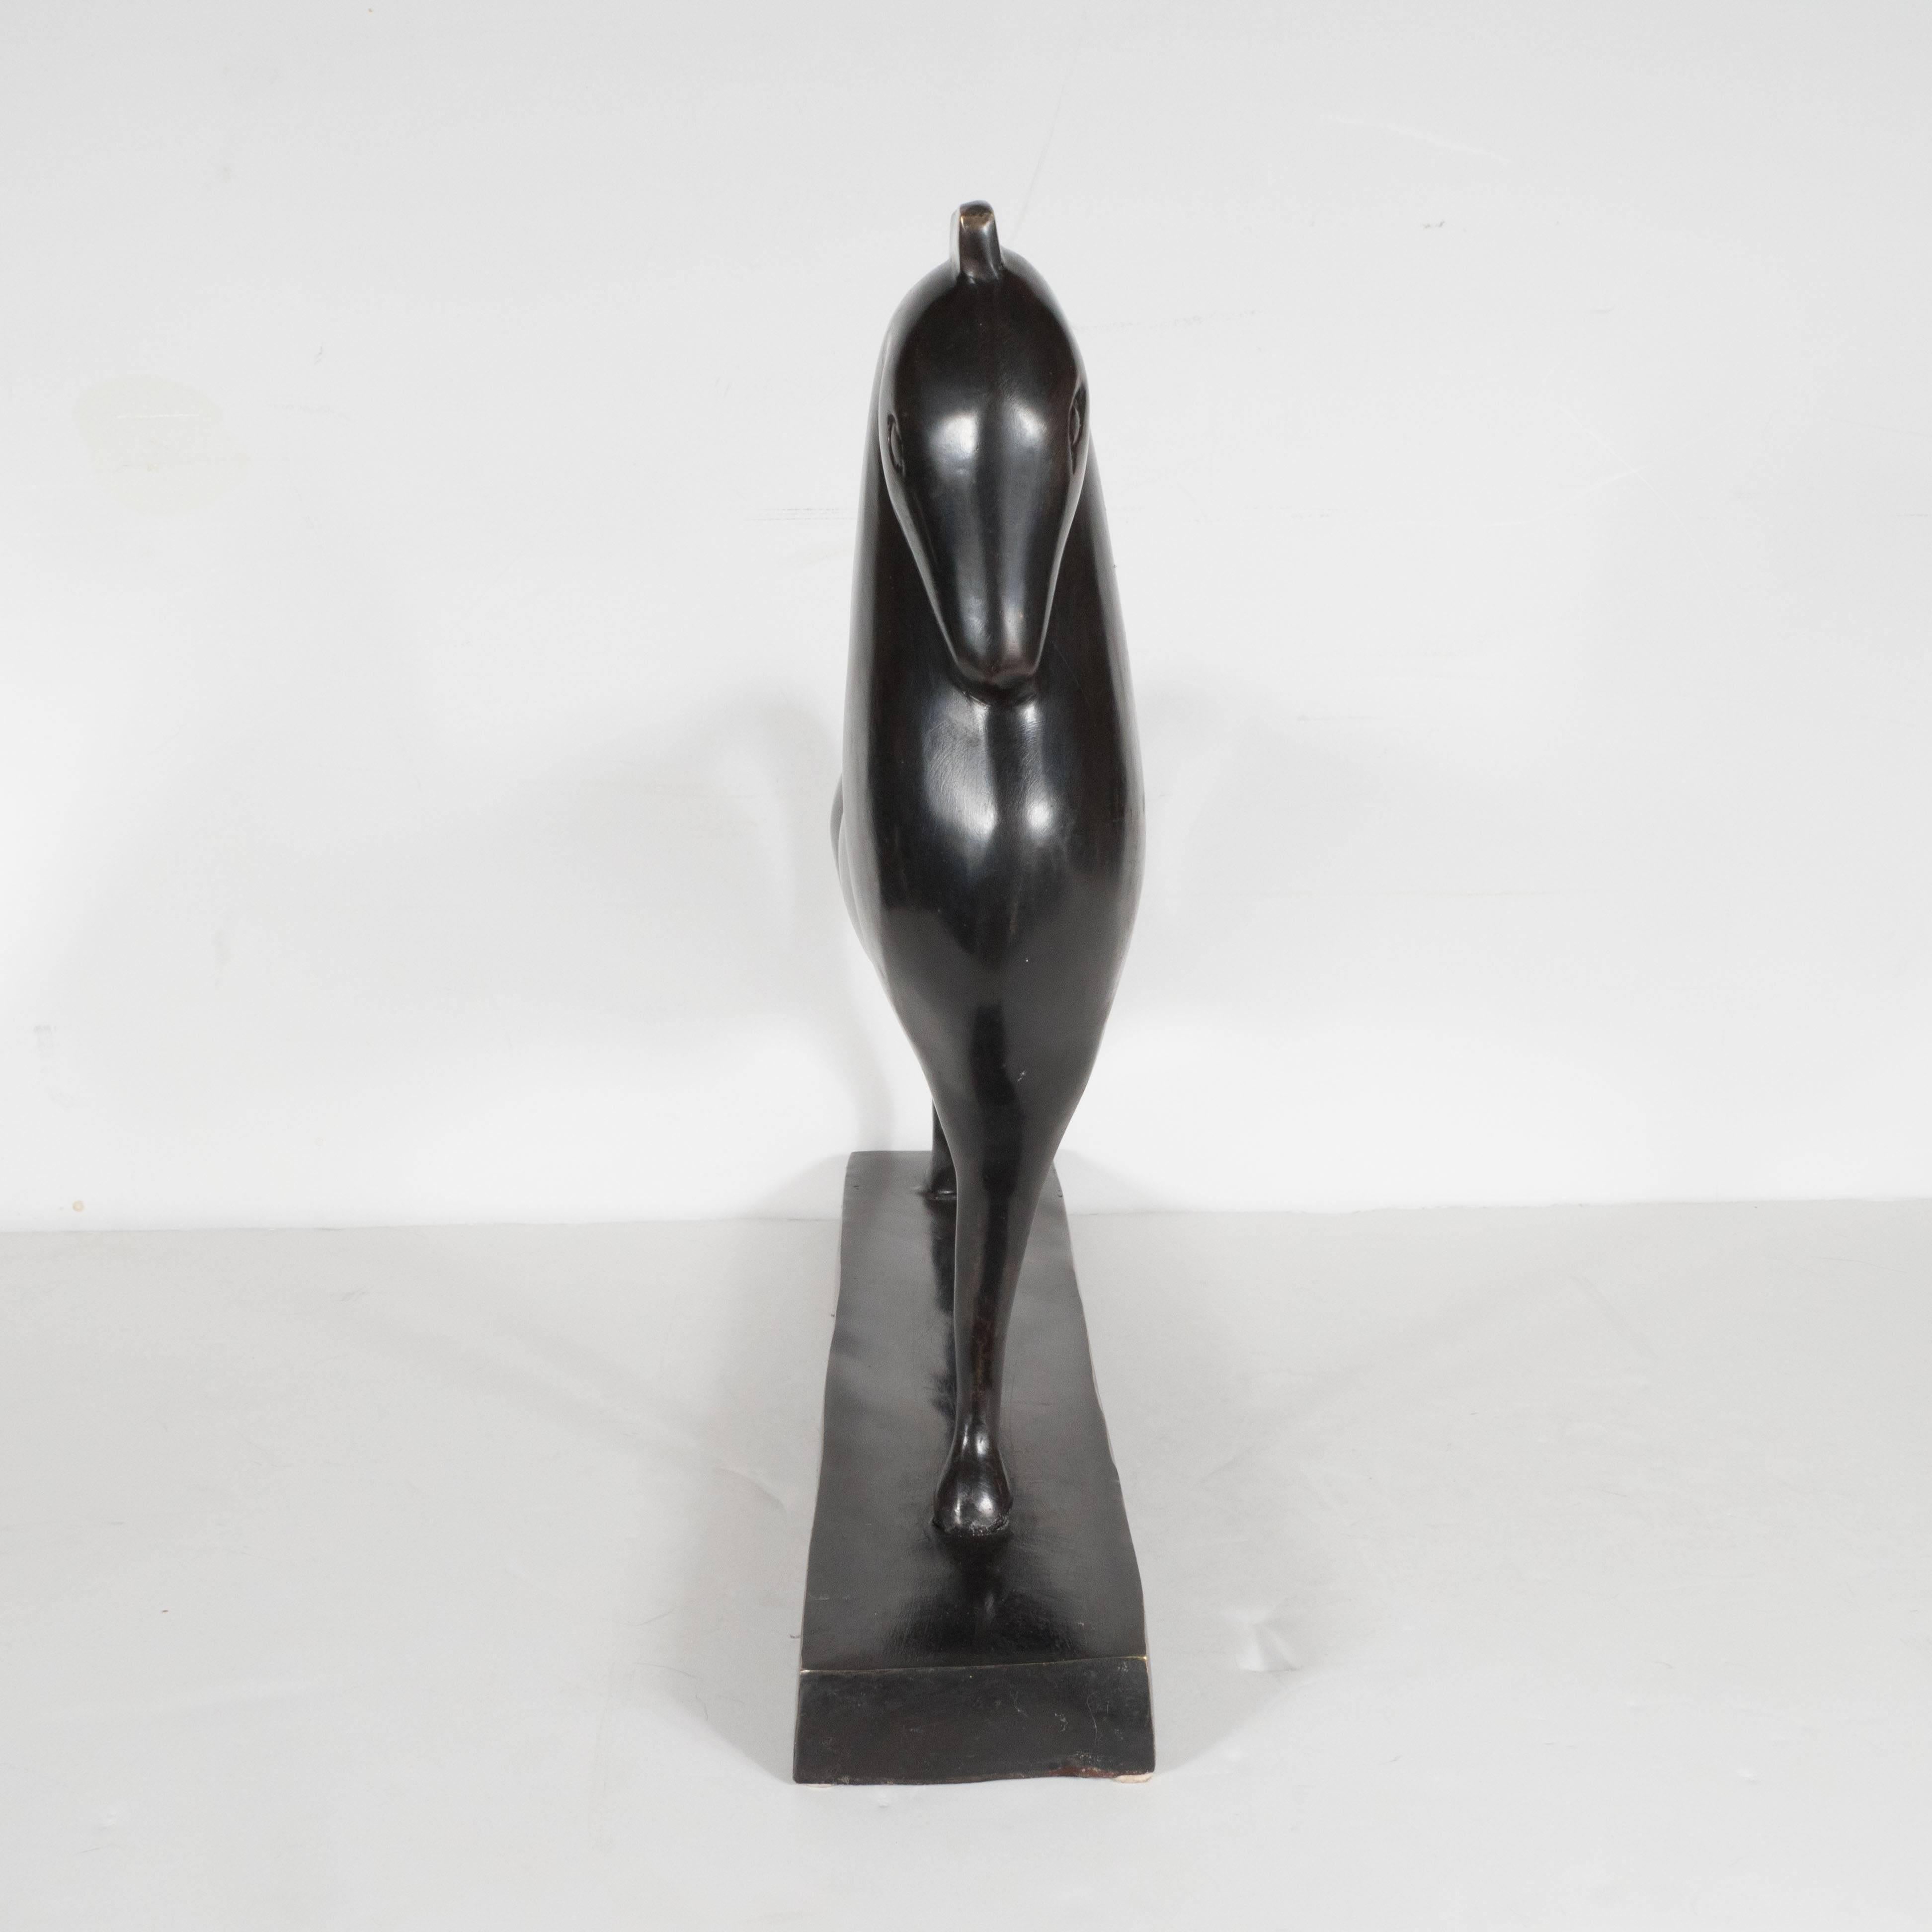 This sleek Mid-Century Modernist sculpture recalls the Classic Etruscan horse- a motif popular in Greek art between the 9th and 2nd centuries B.C. From the side, the sculpture appears to be a robust horse in profile leaning forward, with its head